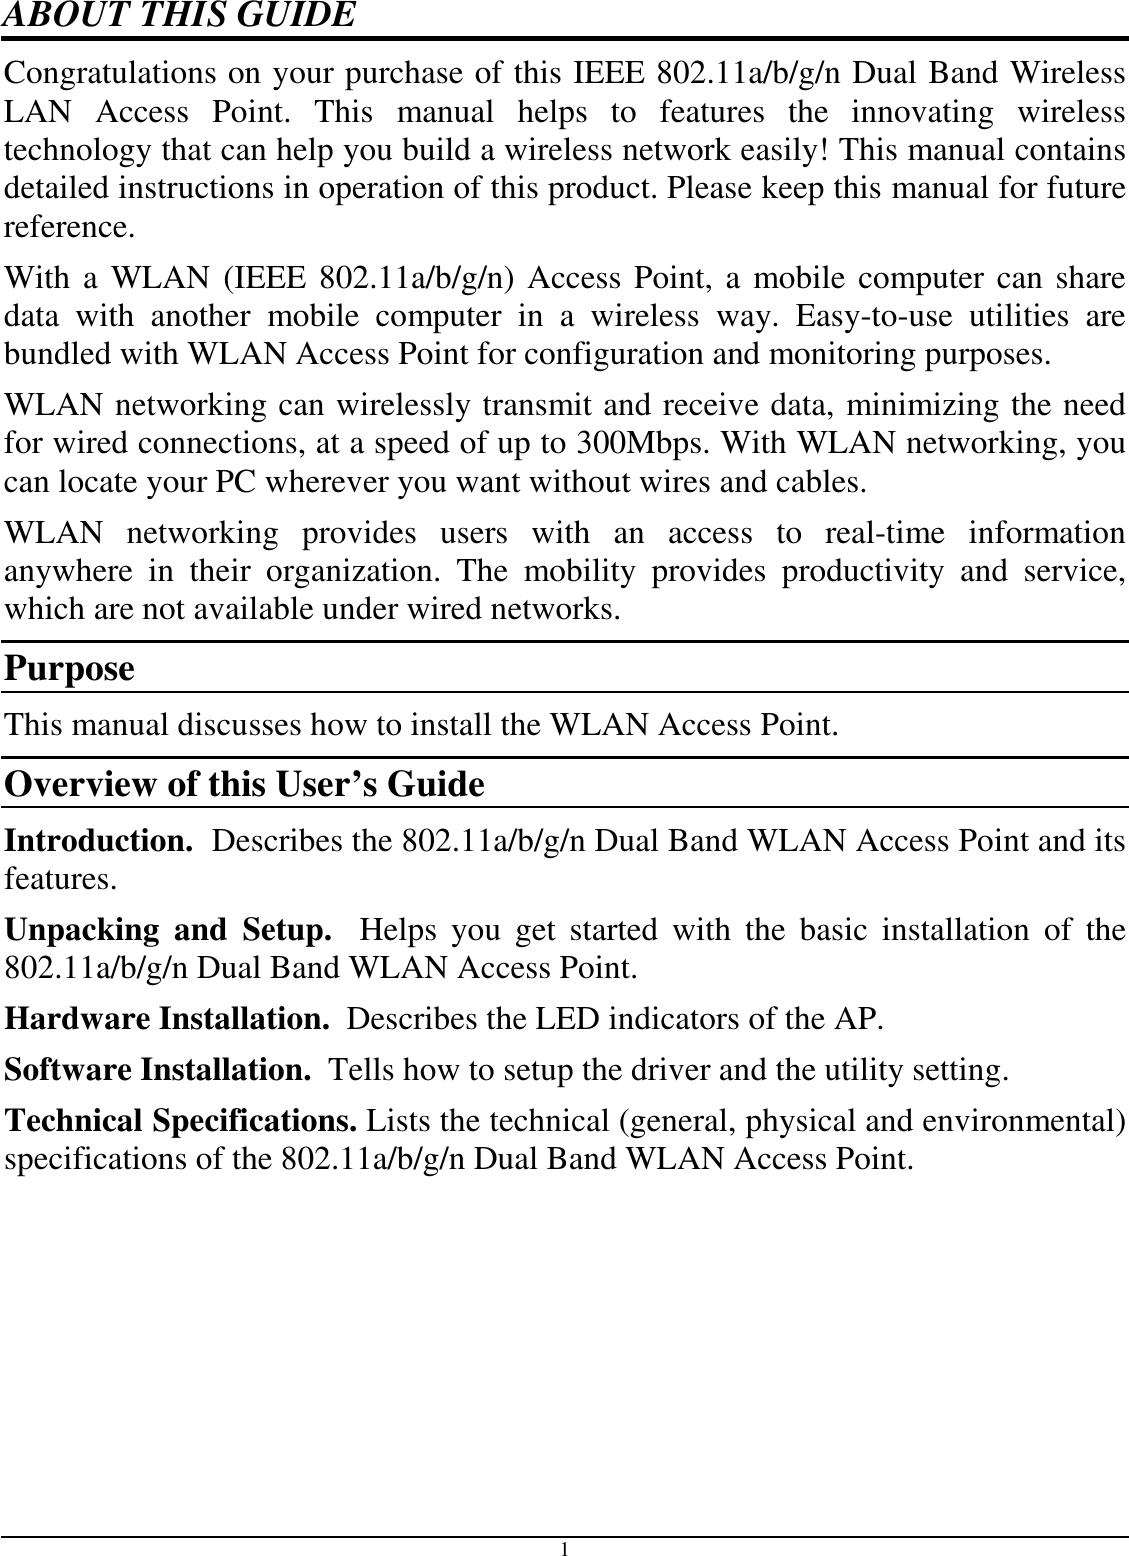 1 ABOUT THIS GUIDE Congratulations on your purchase of this IEEE 802.11a/b/g/n Dual Band Wireless LAN  Access  Point.  This  manual  helps  to  features  the  innovating  wireless technology that can help you build a wireless network easily! This manual contains detailed instructions in operation of this product. Please keep this manual for future reference. With a WLAN (IEEE 802.11a/b/g/n) Access Point, a mobile computer can share data  with  another  mobile  computer  in  a  wireless  way.  Easy-to-use  utilities  are bundled with WLAN Access Point for configuration and monitoring purposes.  WLAN networking can wirelessly transmit and receive data, minimizing the need for wired connections, at a speed of up to 300Mbps. With WLAN networking, you can locate your PC wherever you want without wires and cables. WLAN  networking  provides  users  with  an  access  to  real-time  information anywhere  in  their  organization.  The  mobility  provides  productivity  and  service, which are not available under wired networks.  Purpose This manual discusses how to install the WLAN Access Point.  Overview of this User’s Guide Introduction.  Describes the 802.11a/b/g/n Dual Band WLAN Access Point and its features. Unpacking  and  Setup.    Helps  you  get  started  with  the  basic  installation  of  the 802.11a/b/g/n Dual Band WLAN Access Point. Hardware Installation.  Describes the LED indicators of the AP. Software Installation.  Tells how to setup the driver and the utility setting. Technical Specifications. Lists the technical (general, physical and environmental) specifications of the 802.11a/b/g/n Dual Band WLAN Access Point. 